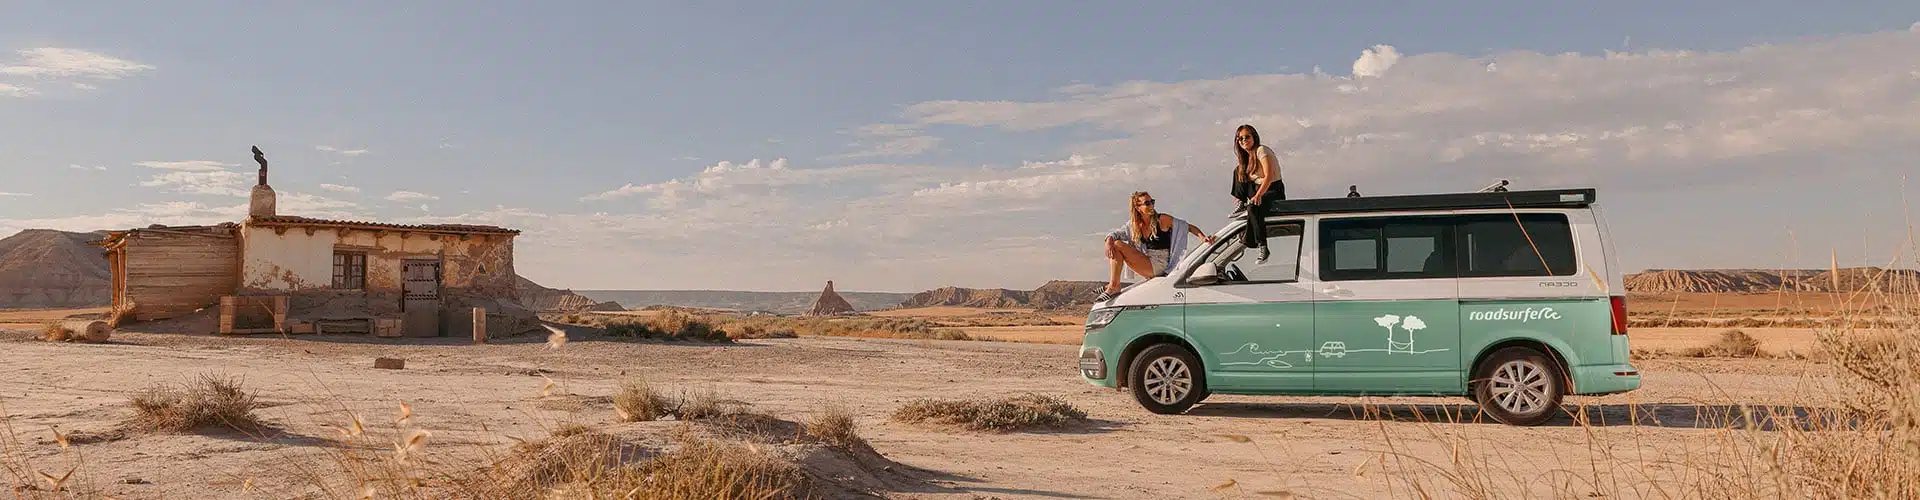 VW California camper van from roadsurfer in the desert sun, two smiling girls sitting on the hood and roof of the van